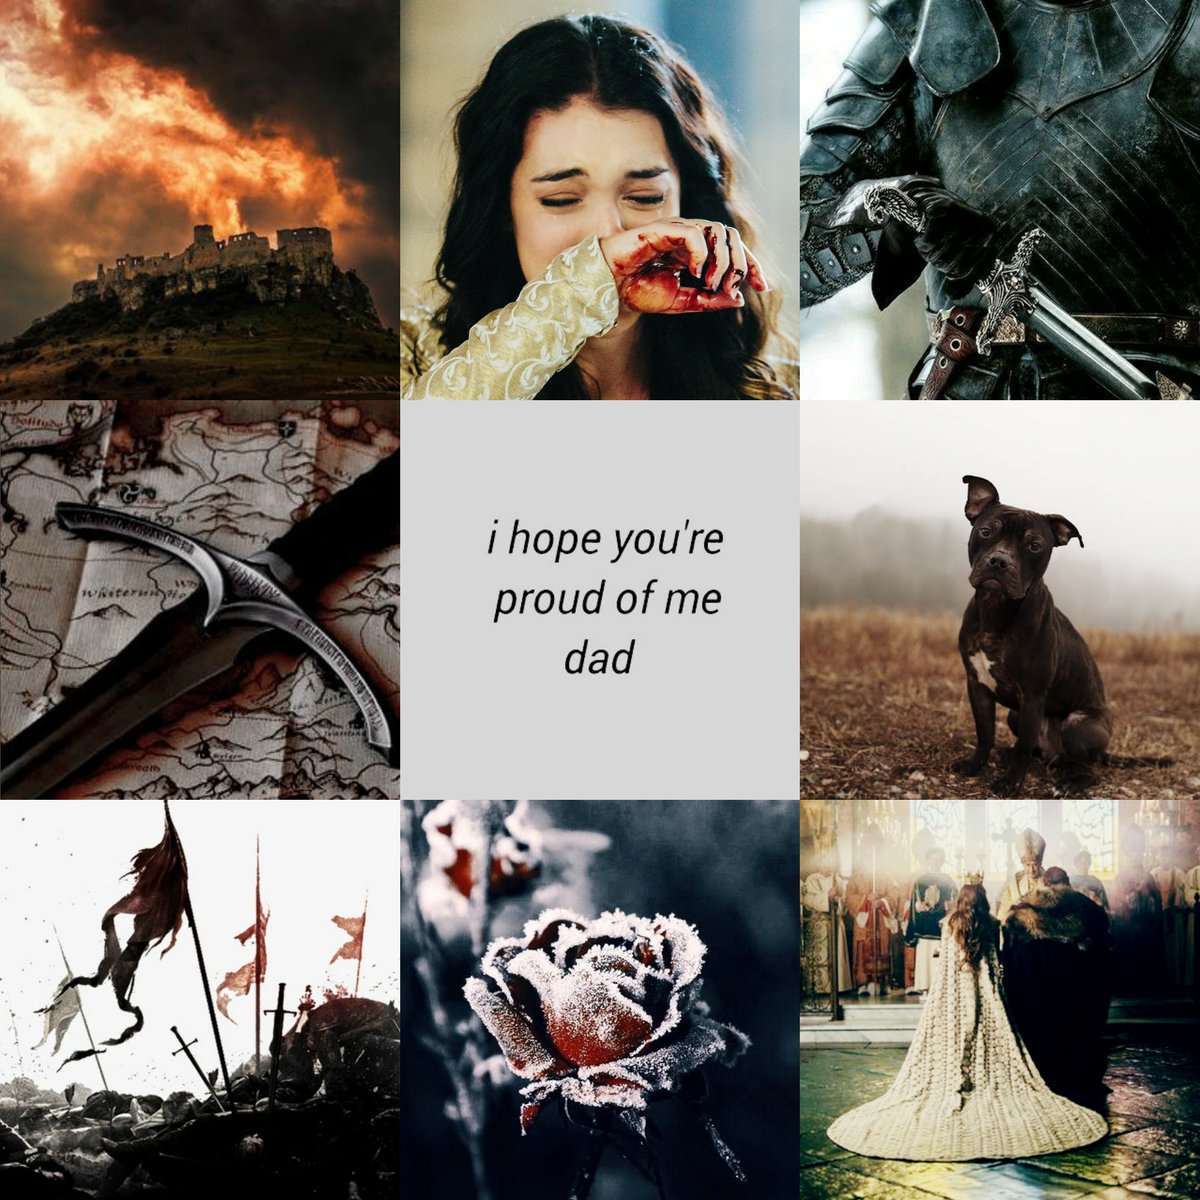 #DragonAge #DragonAgeAesthetic #WardenCousland

There are no happy endings.
Endings are the saddest part,
So just give me a happy middle
And a very happy start.